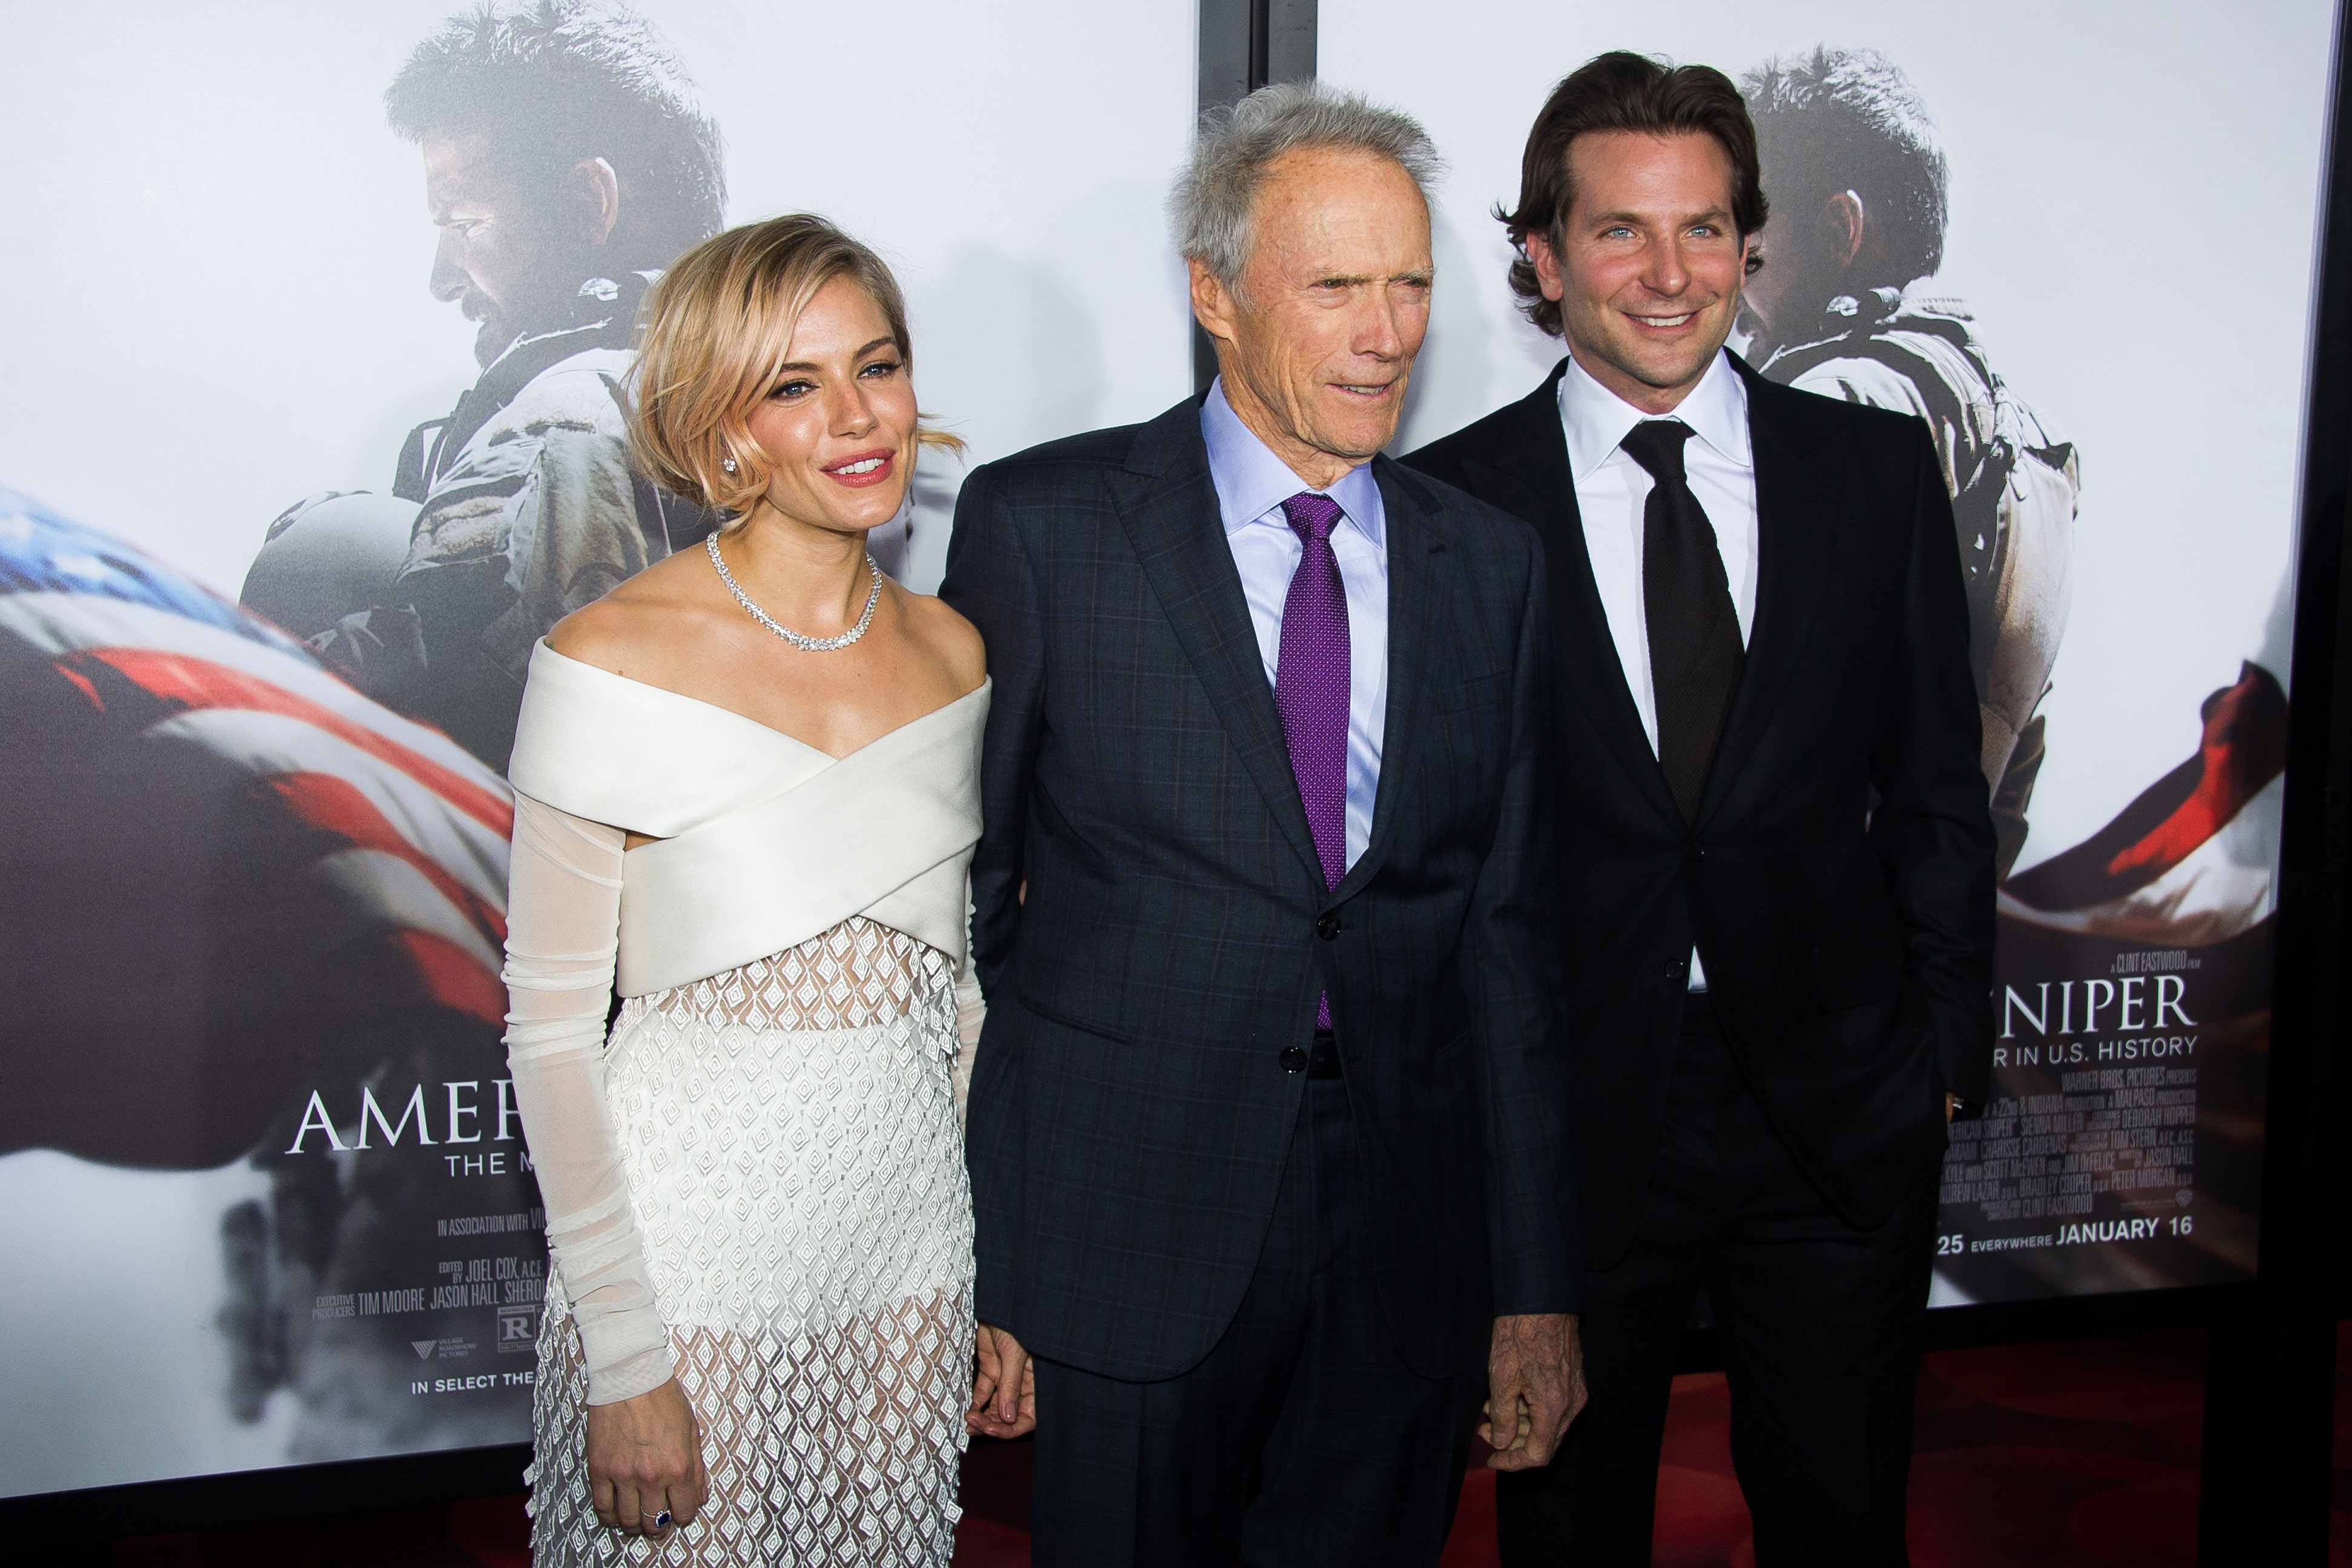 Sienna Miller, from left, Clint Eastwood and Bradley Cooper attend the 